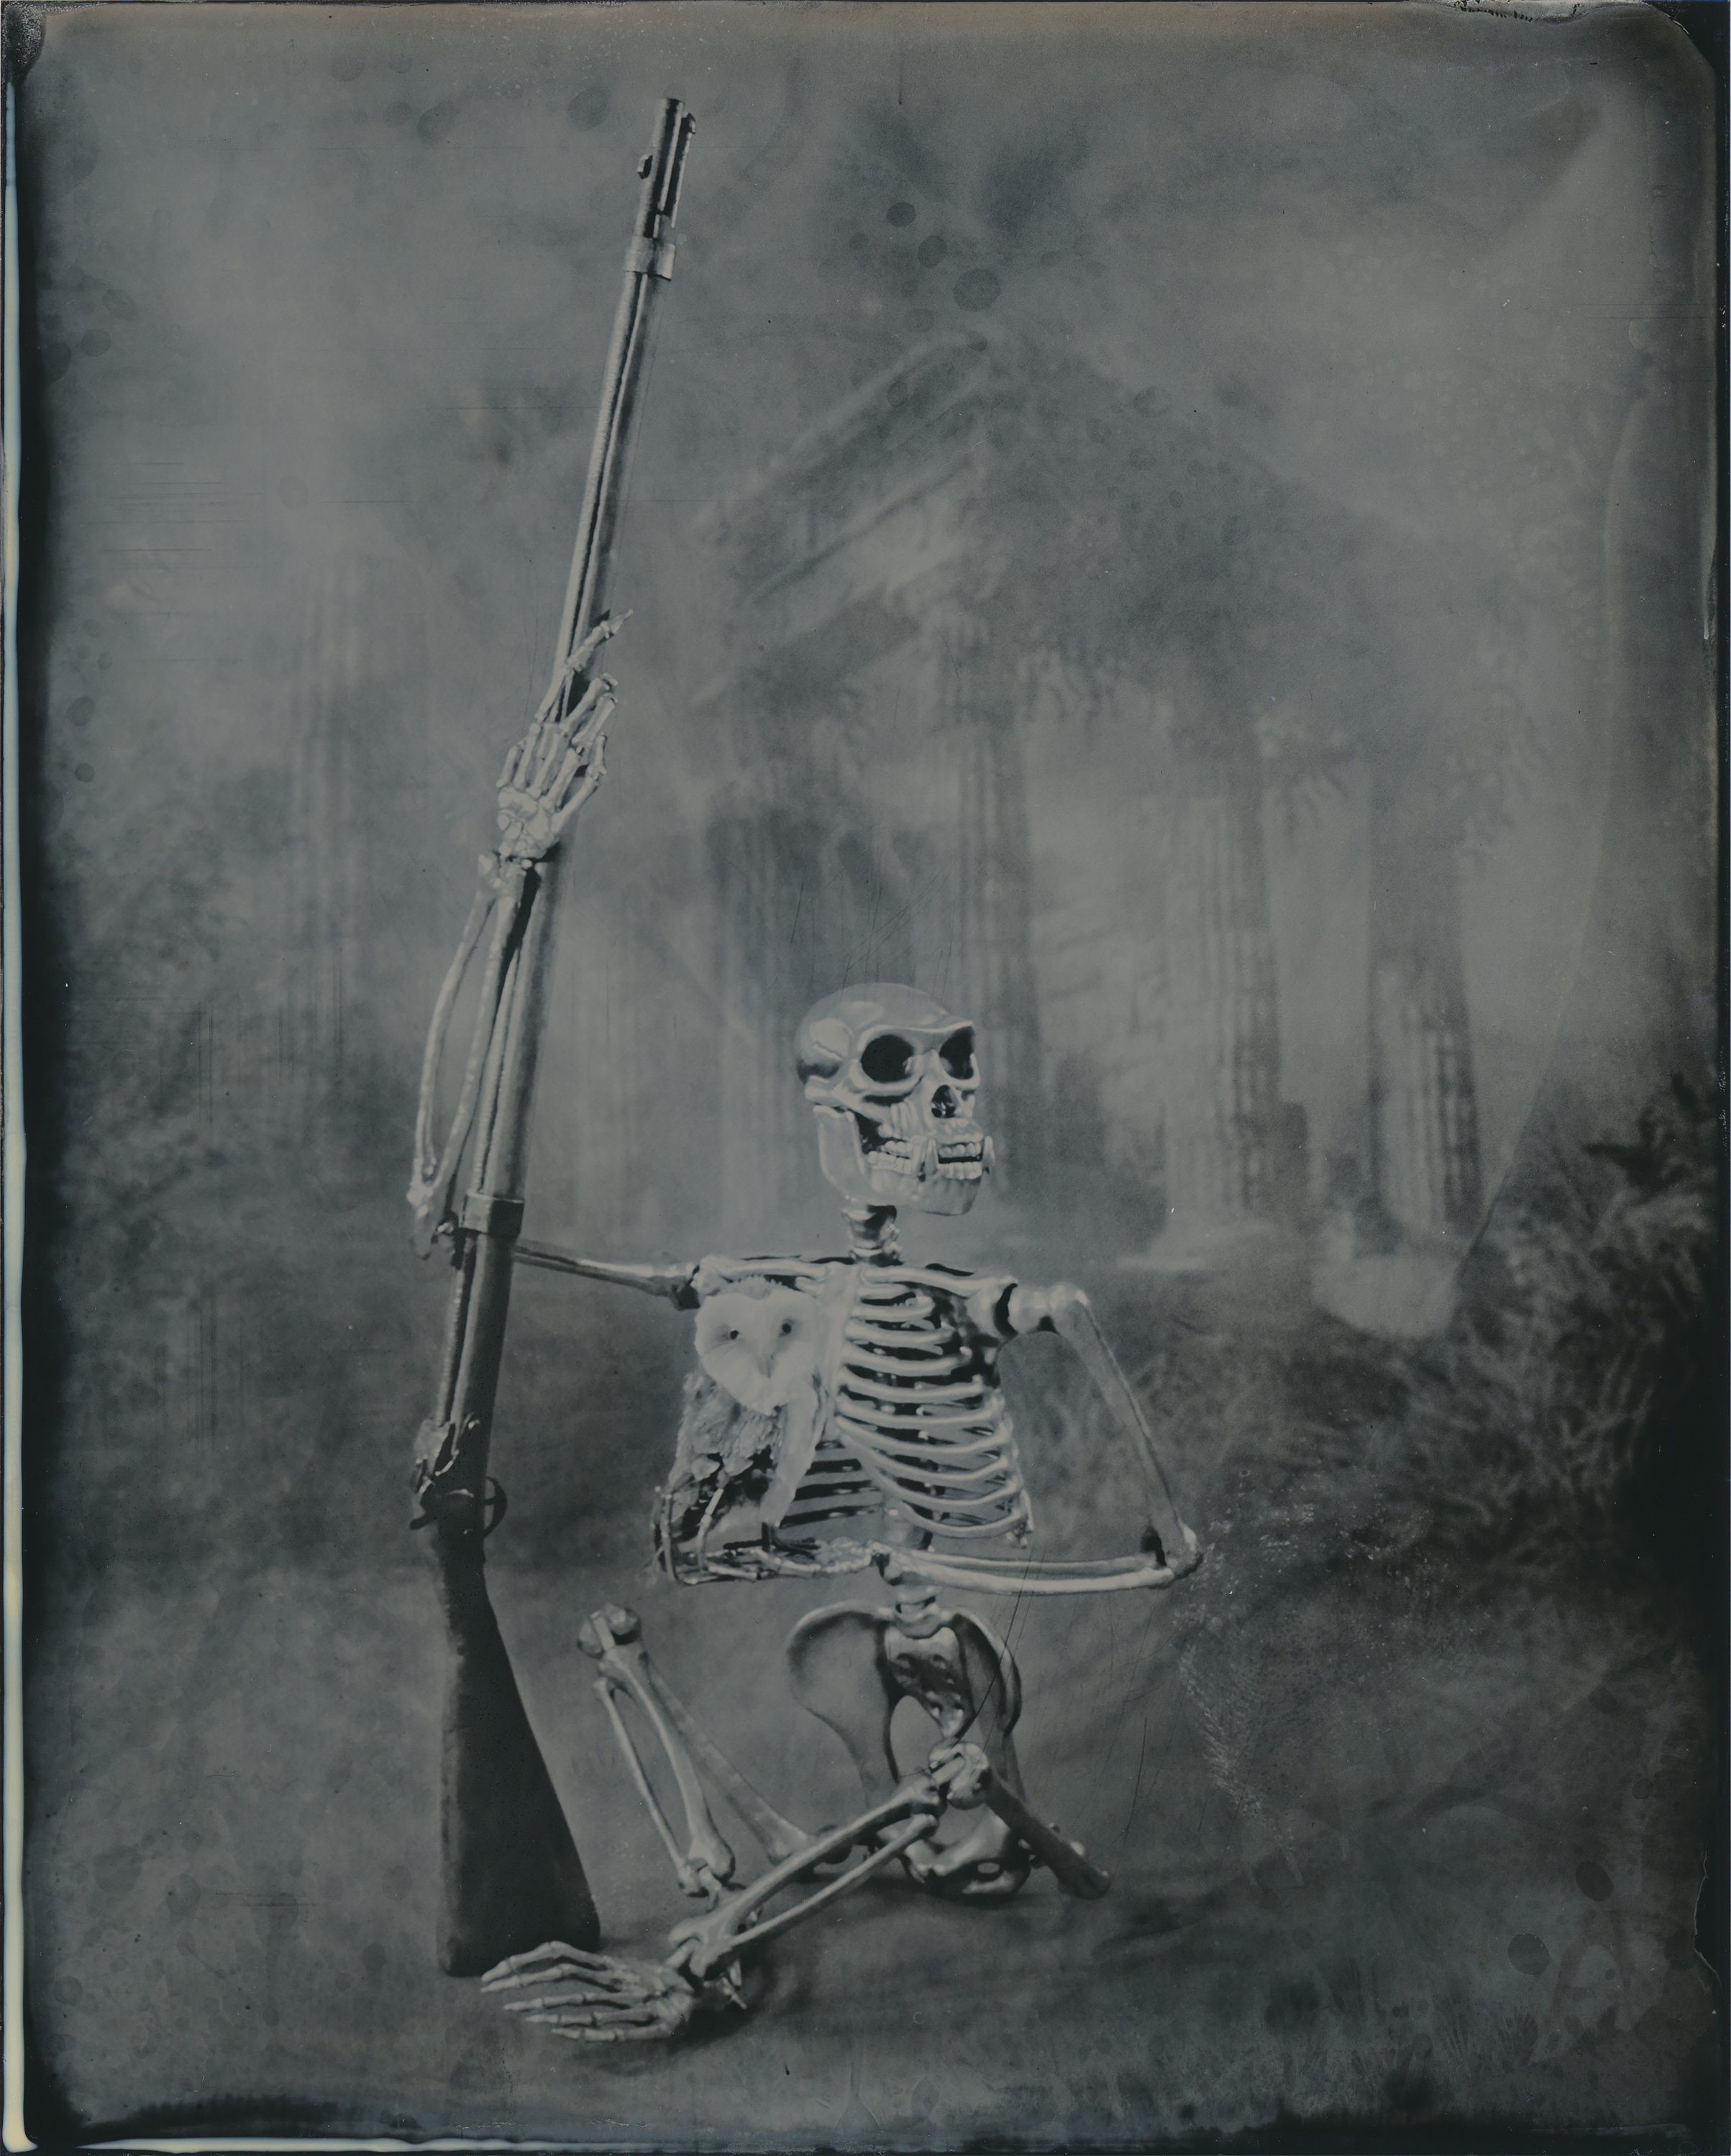   “Athena”   2022  Wet Plate Collodion  8x10 